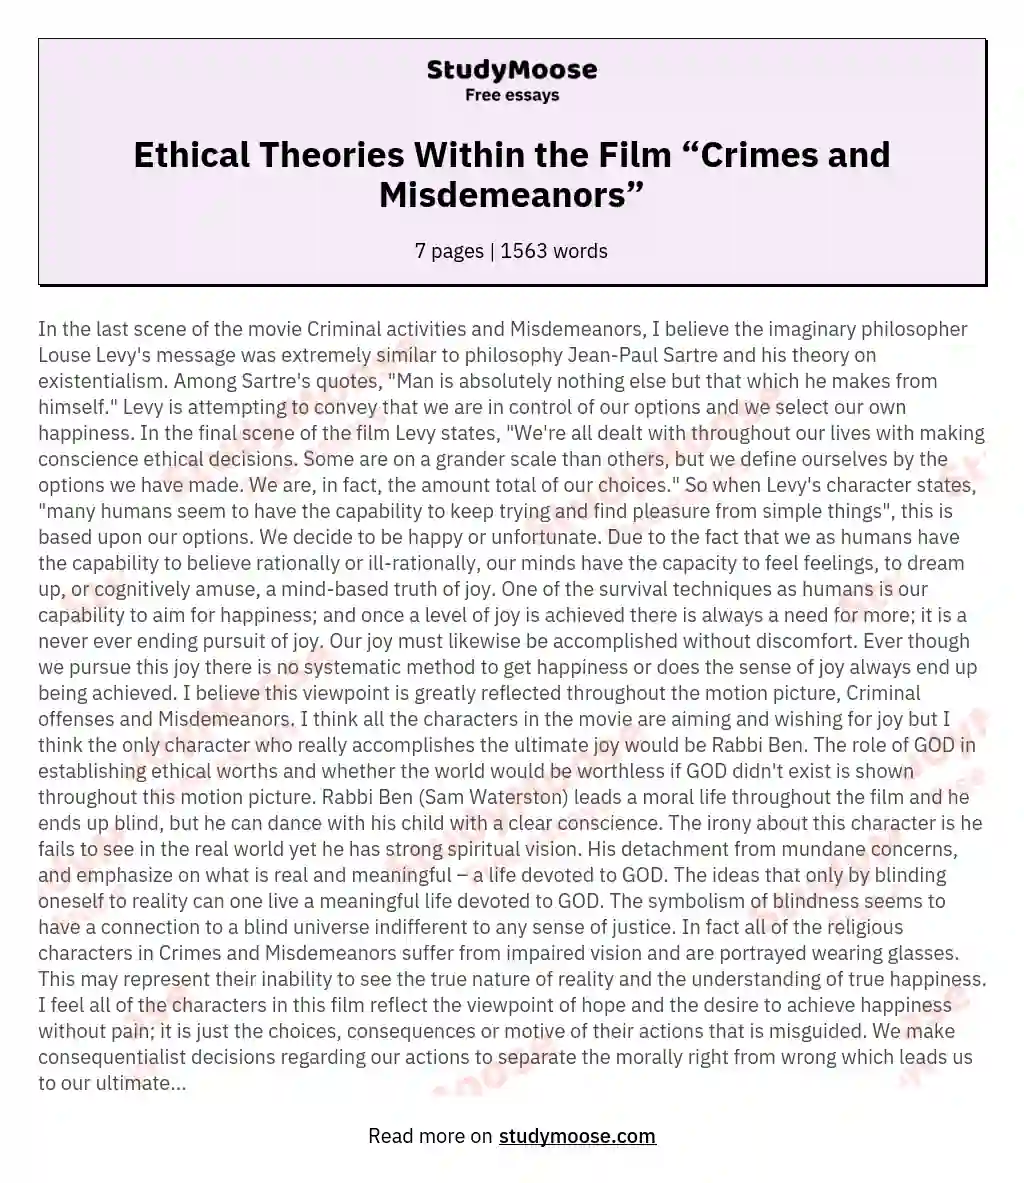 Ethical Theories Within the Film “Crimes and Misdemeanors”